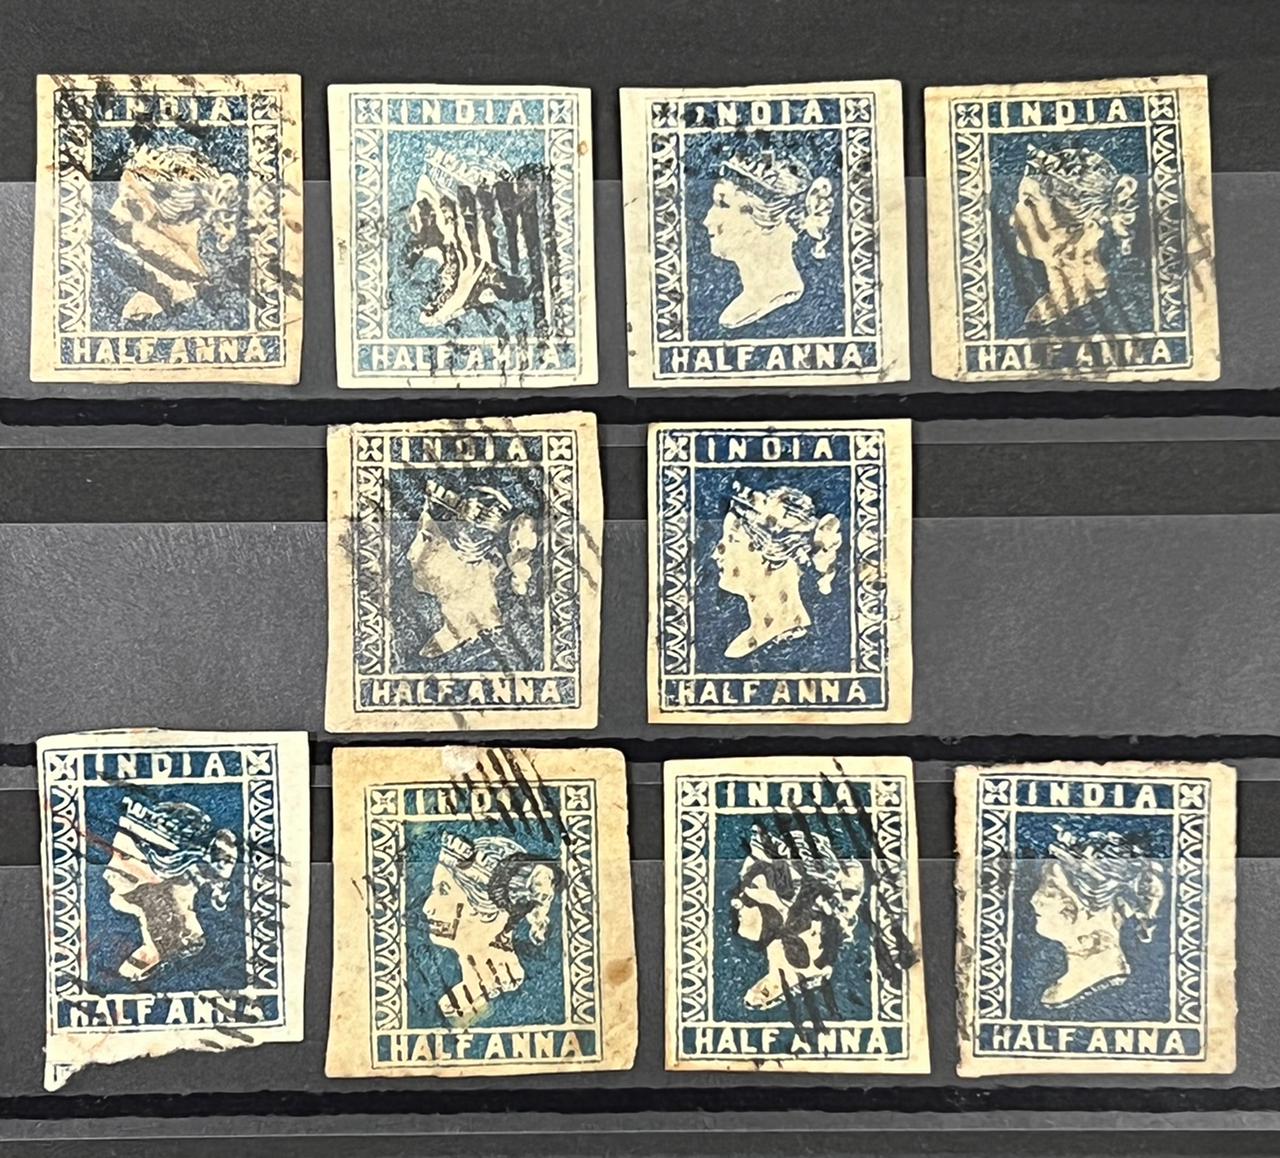 India 1854 First Issues Half Anna Blue Complete Set of all Shades and Dies Fine used Big Margins SG Cat Val - £1415